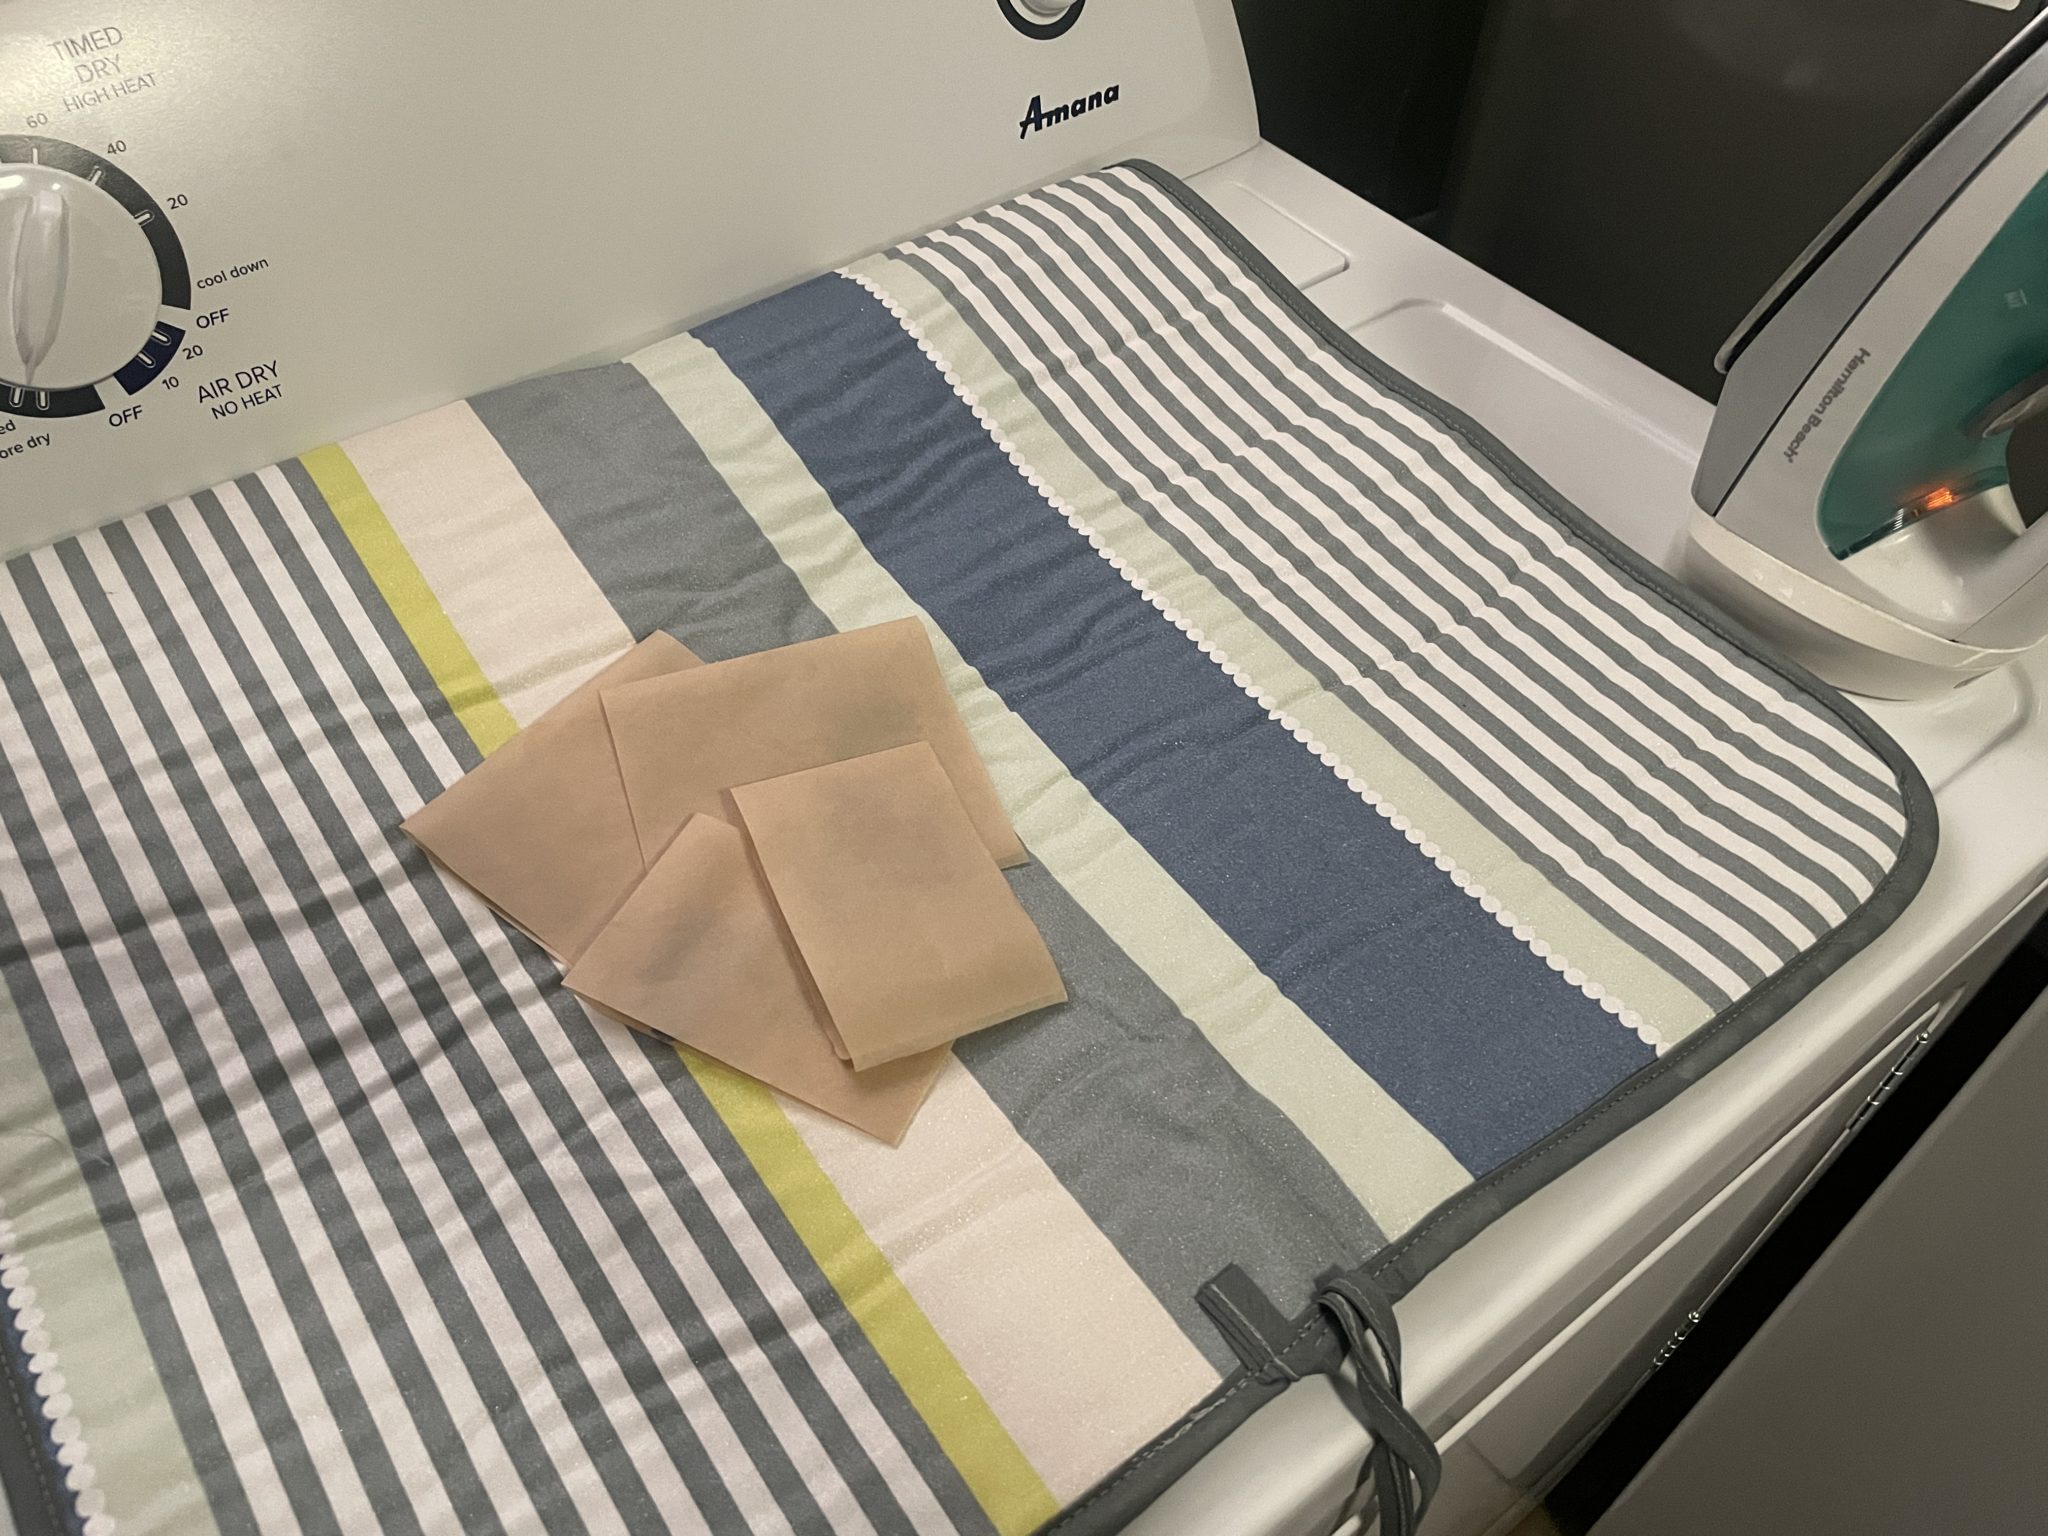 Photo of a striped ironing blanket with four pieces of folded waxed paper laid on top. The ironing blanket is laid on top of a dryer next to an iron.